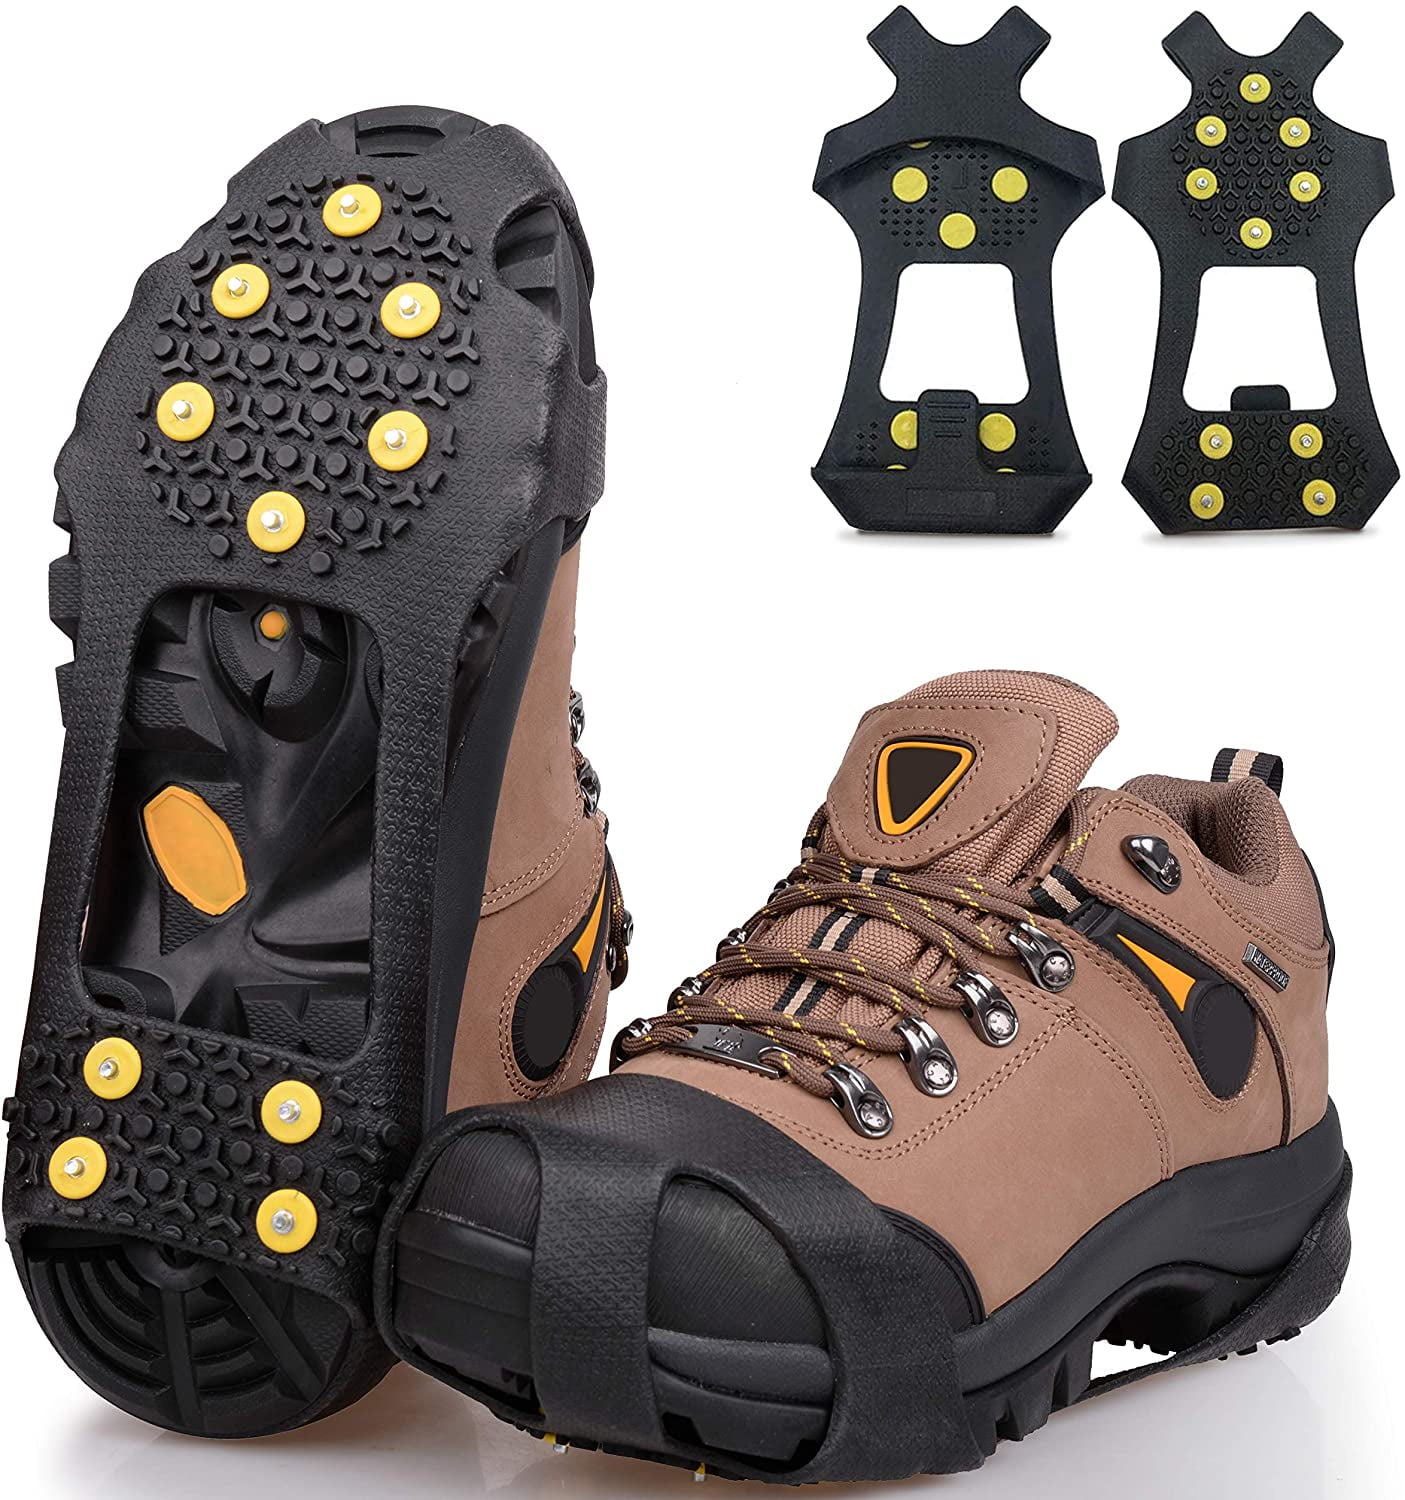 Ice Snow Cleats for Shoes Boots Walk Traction Cleats Rubber Crampons ...